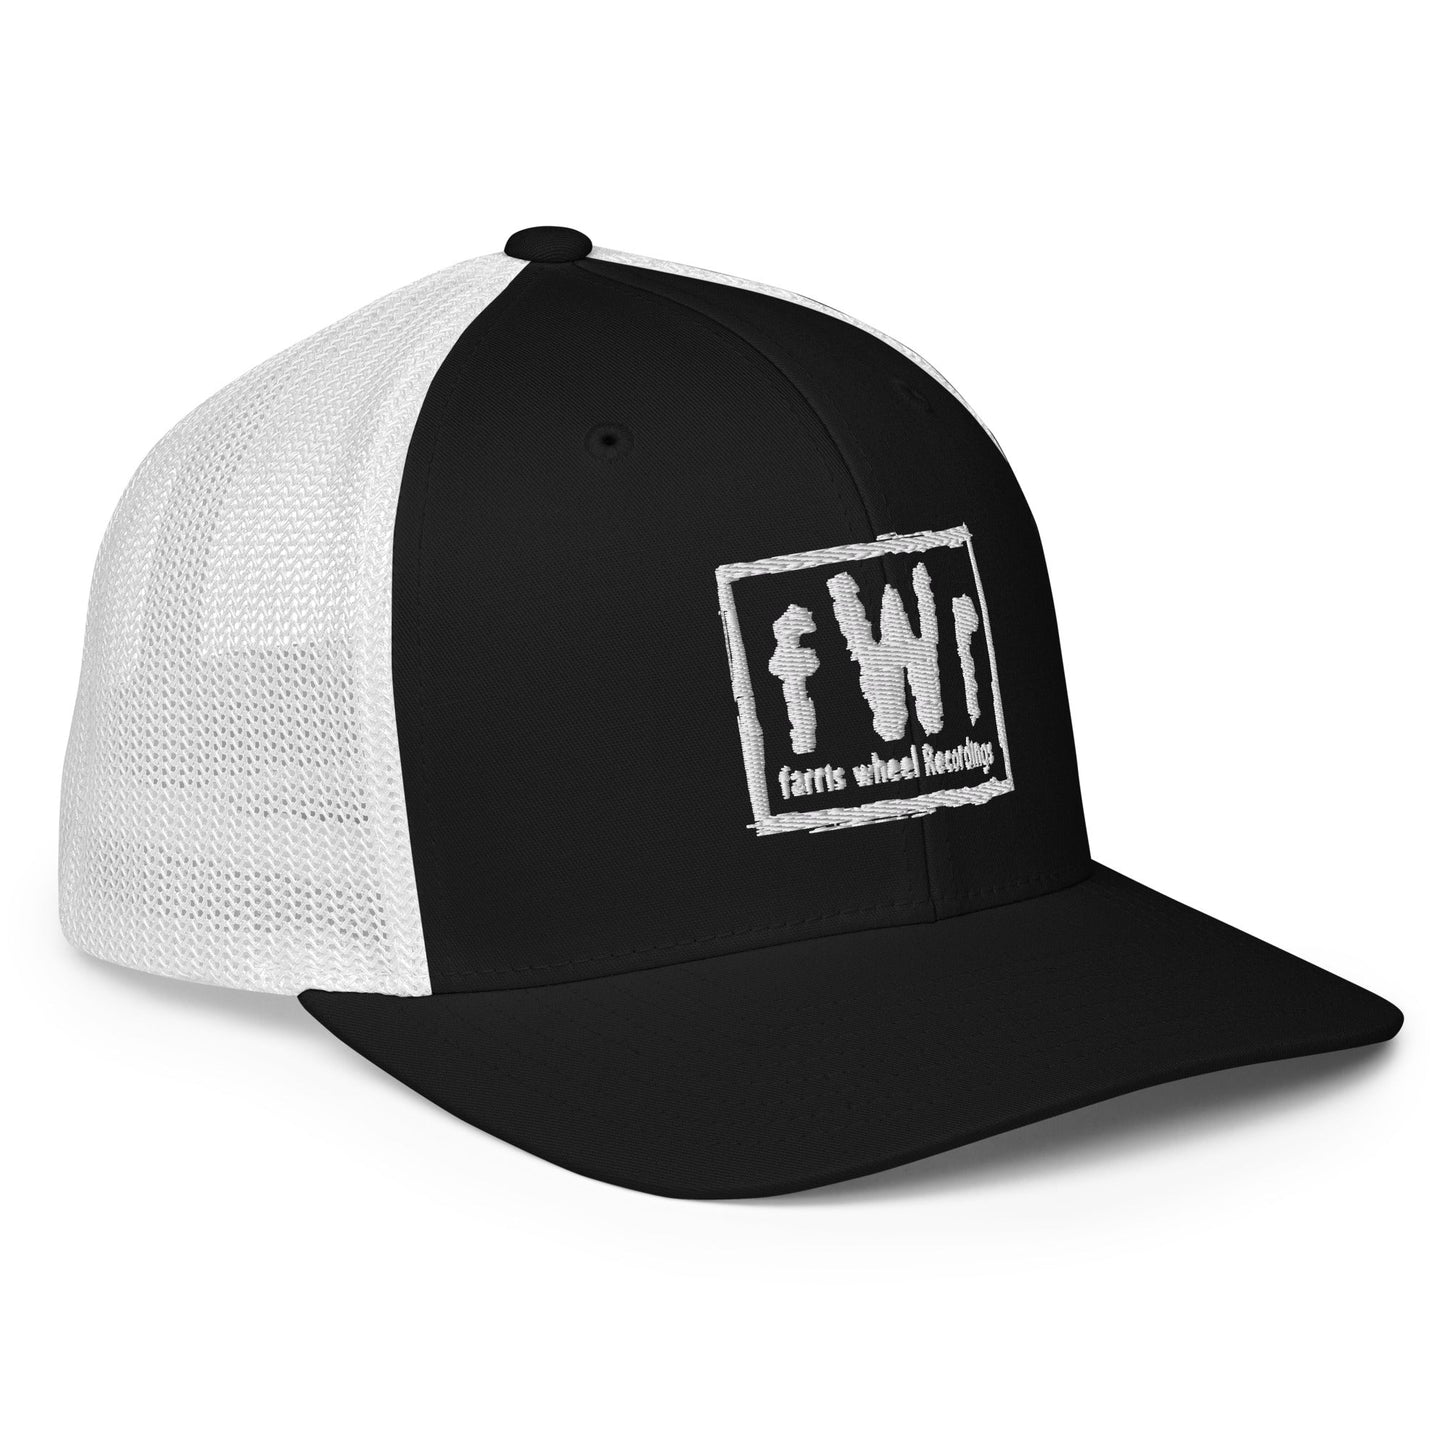 Farris Wheel fWr Closed-back Trucker Cap - BeExtra! Apparel & More